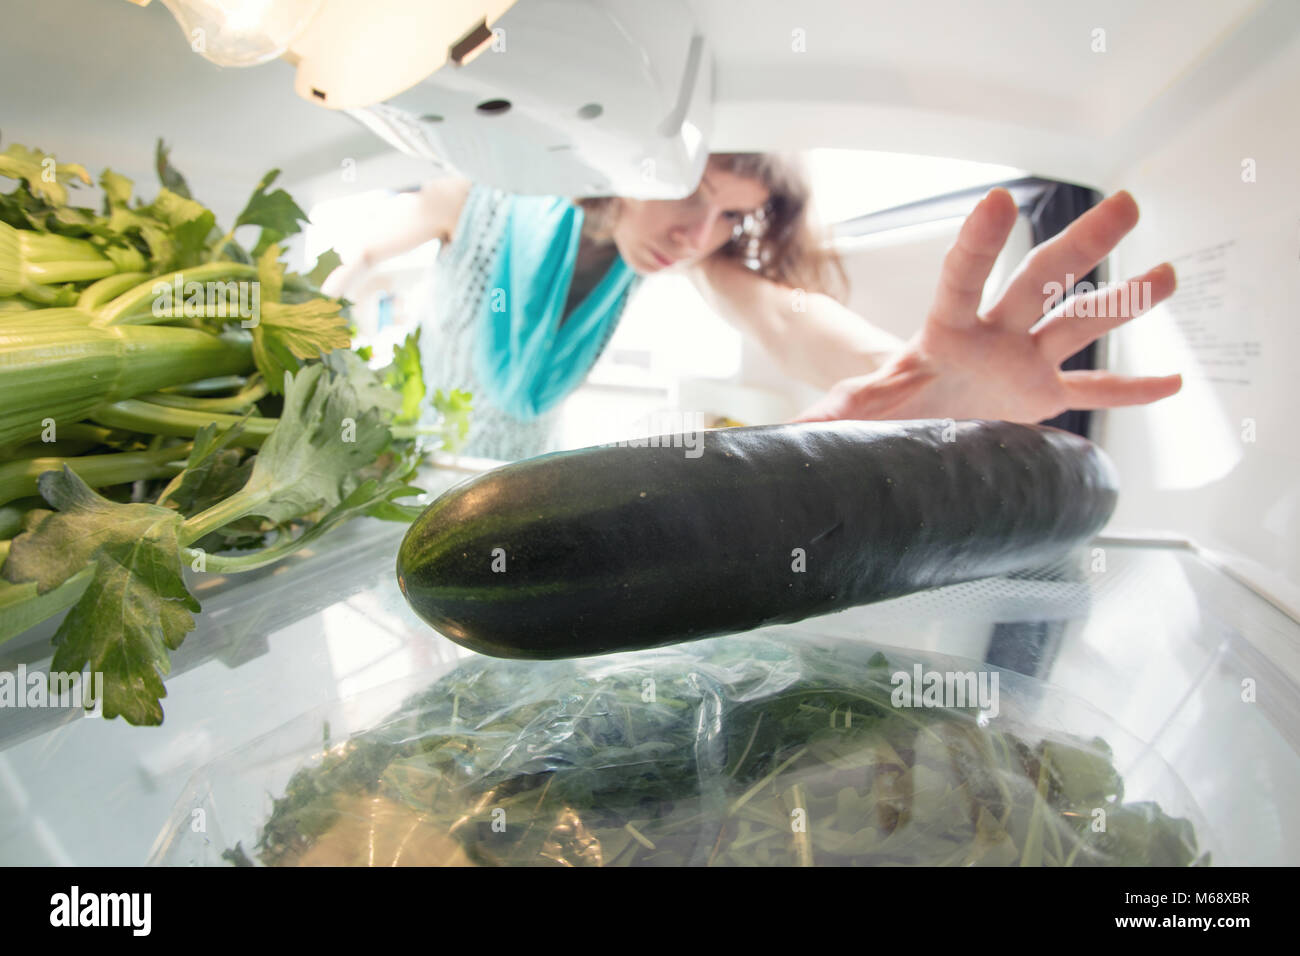 Healthy diet: A hand in an open refrigerator full of greens reaching for a cucumber. Stock Photo